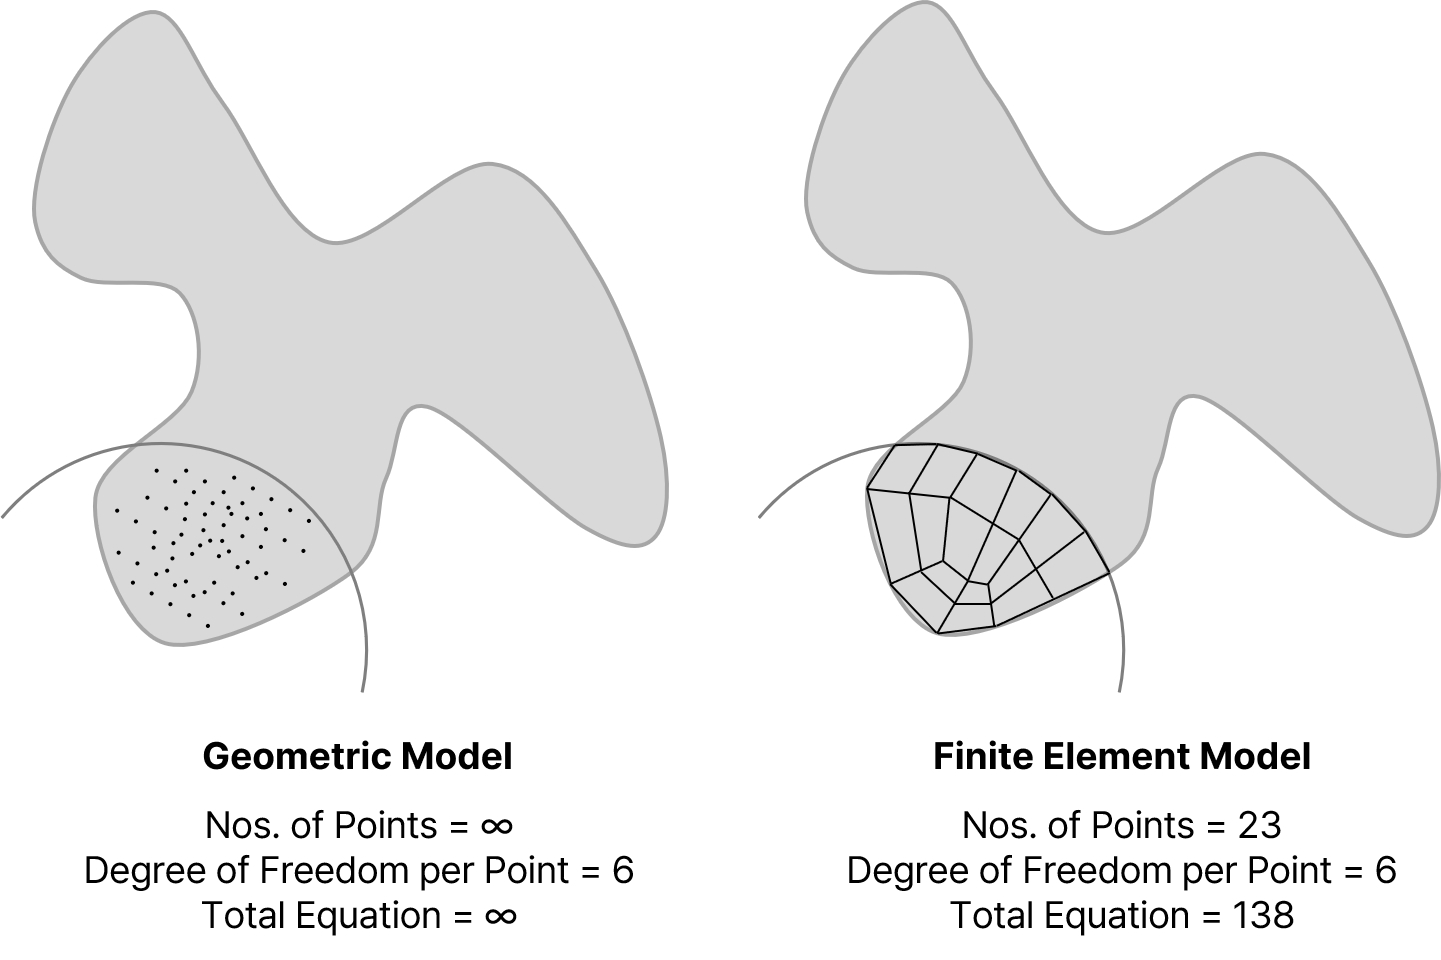 figure 1_Difference between Geometric Model and Finite Element Model